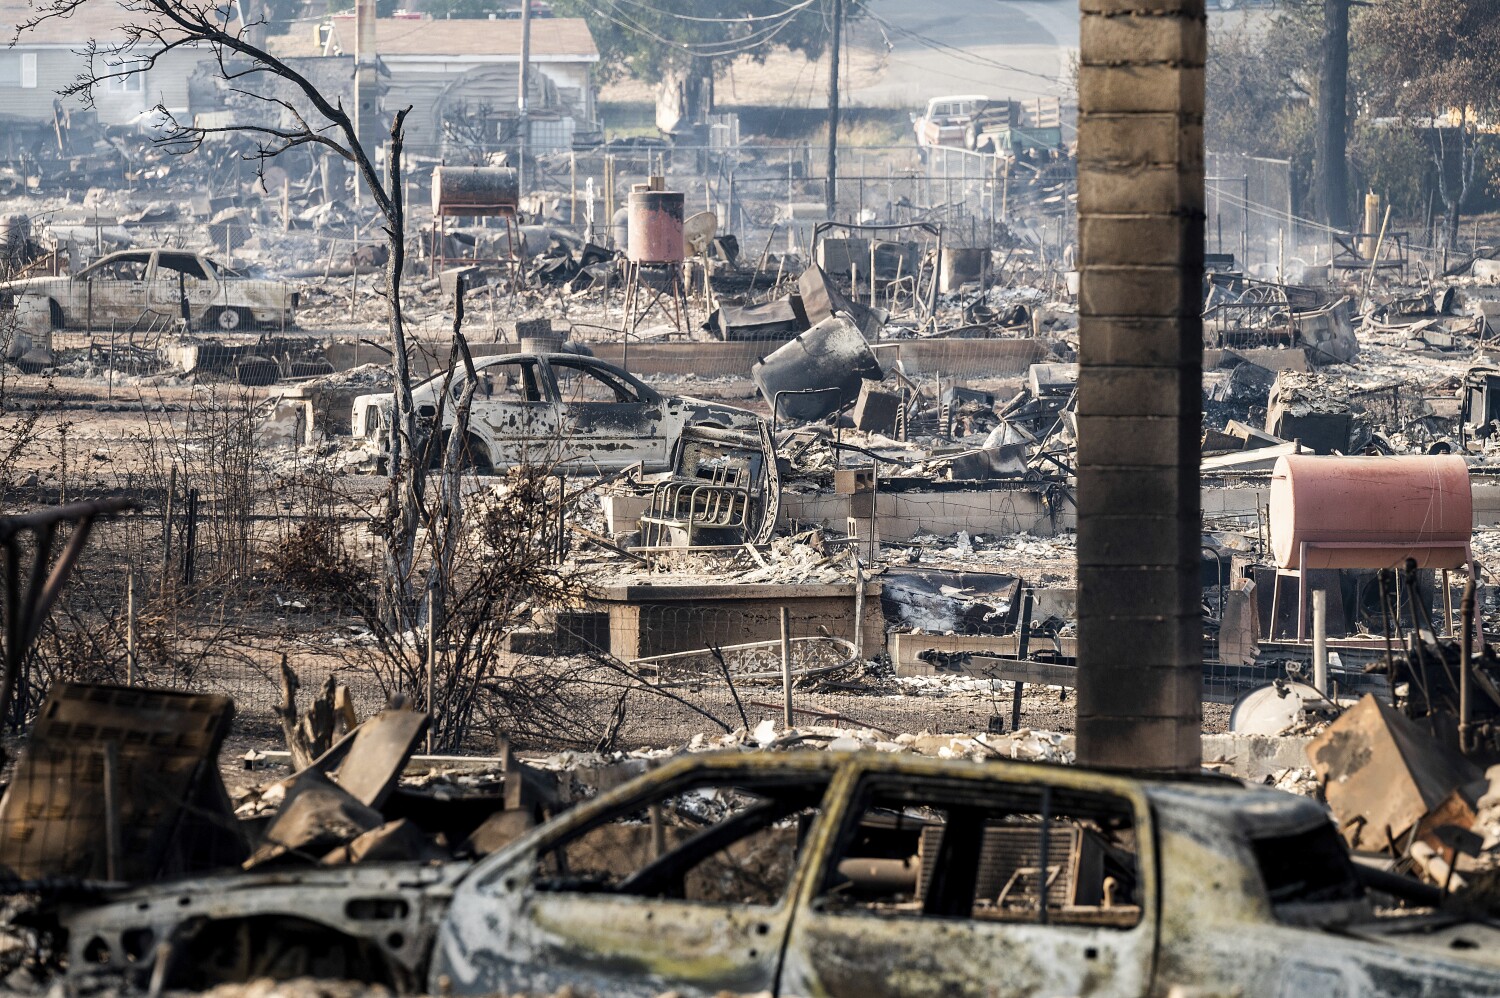 Northern California wildfire wipes out entire neighborhood